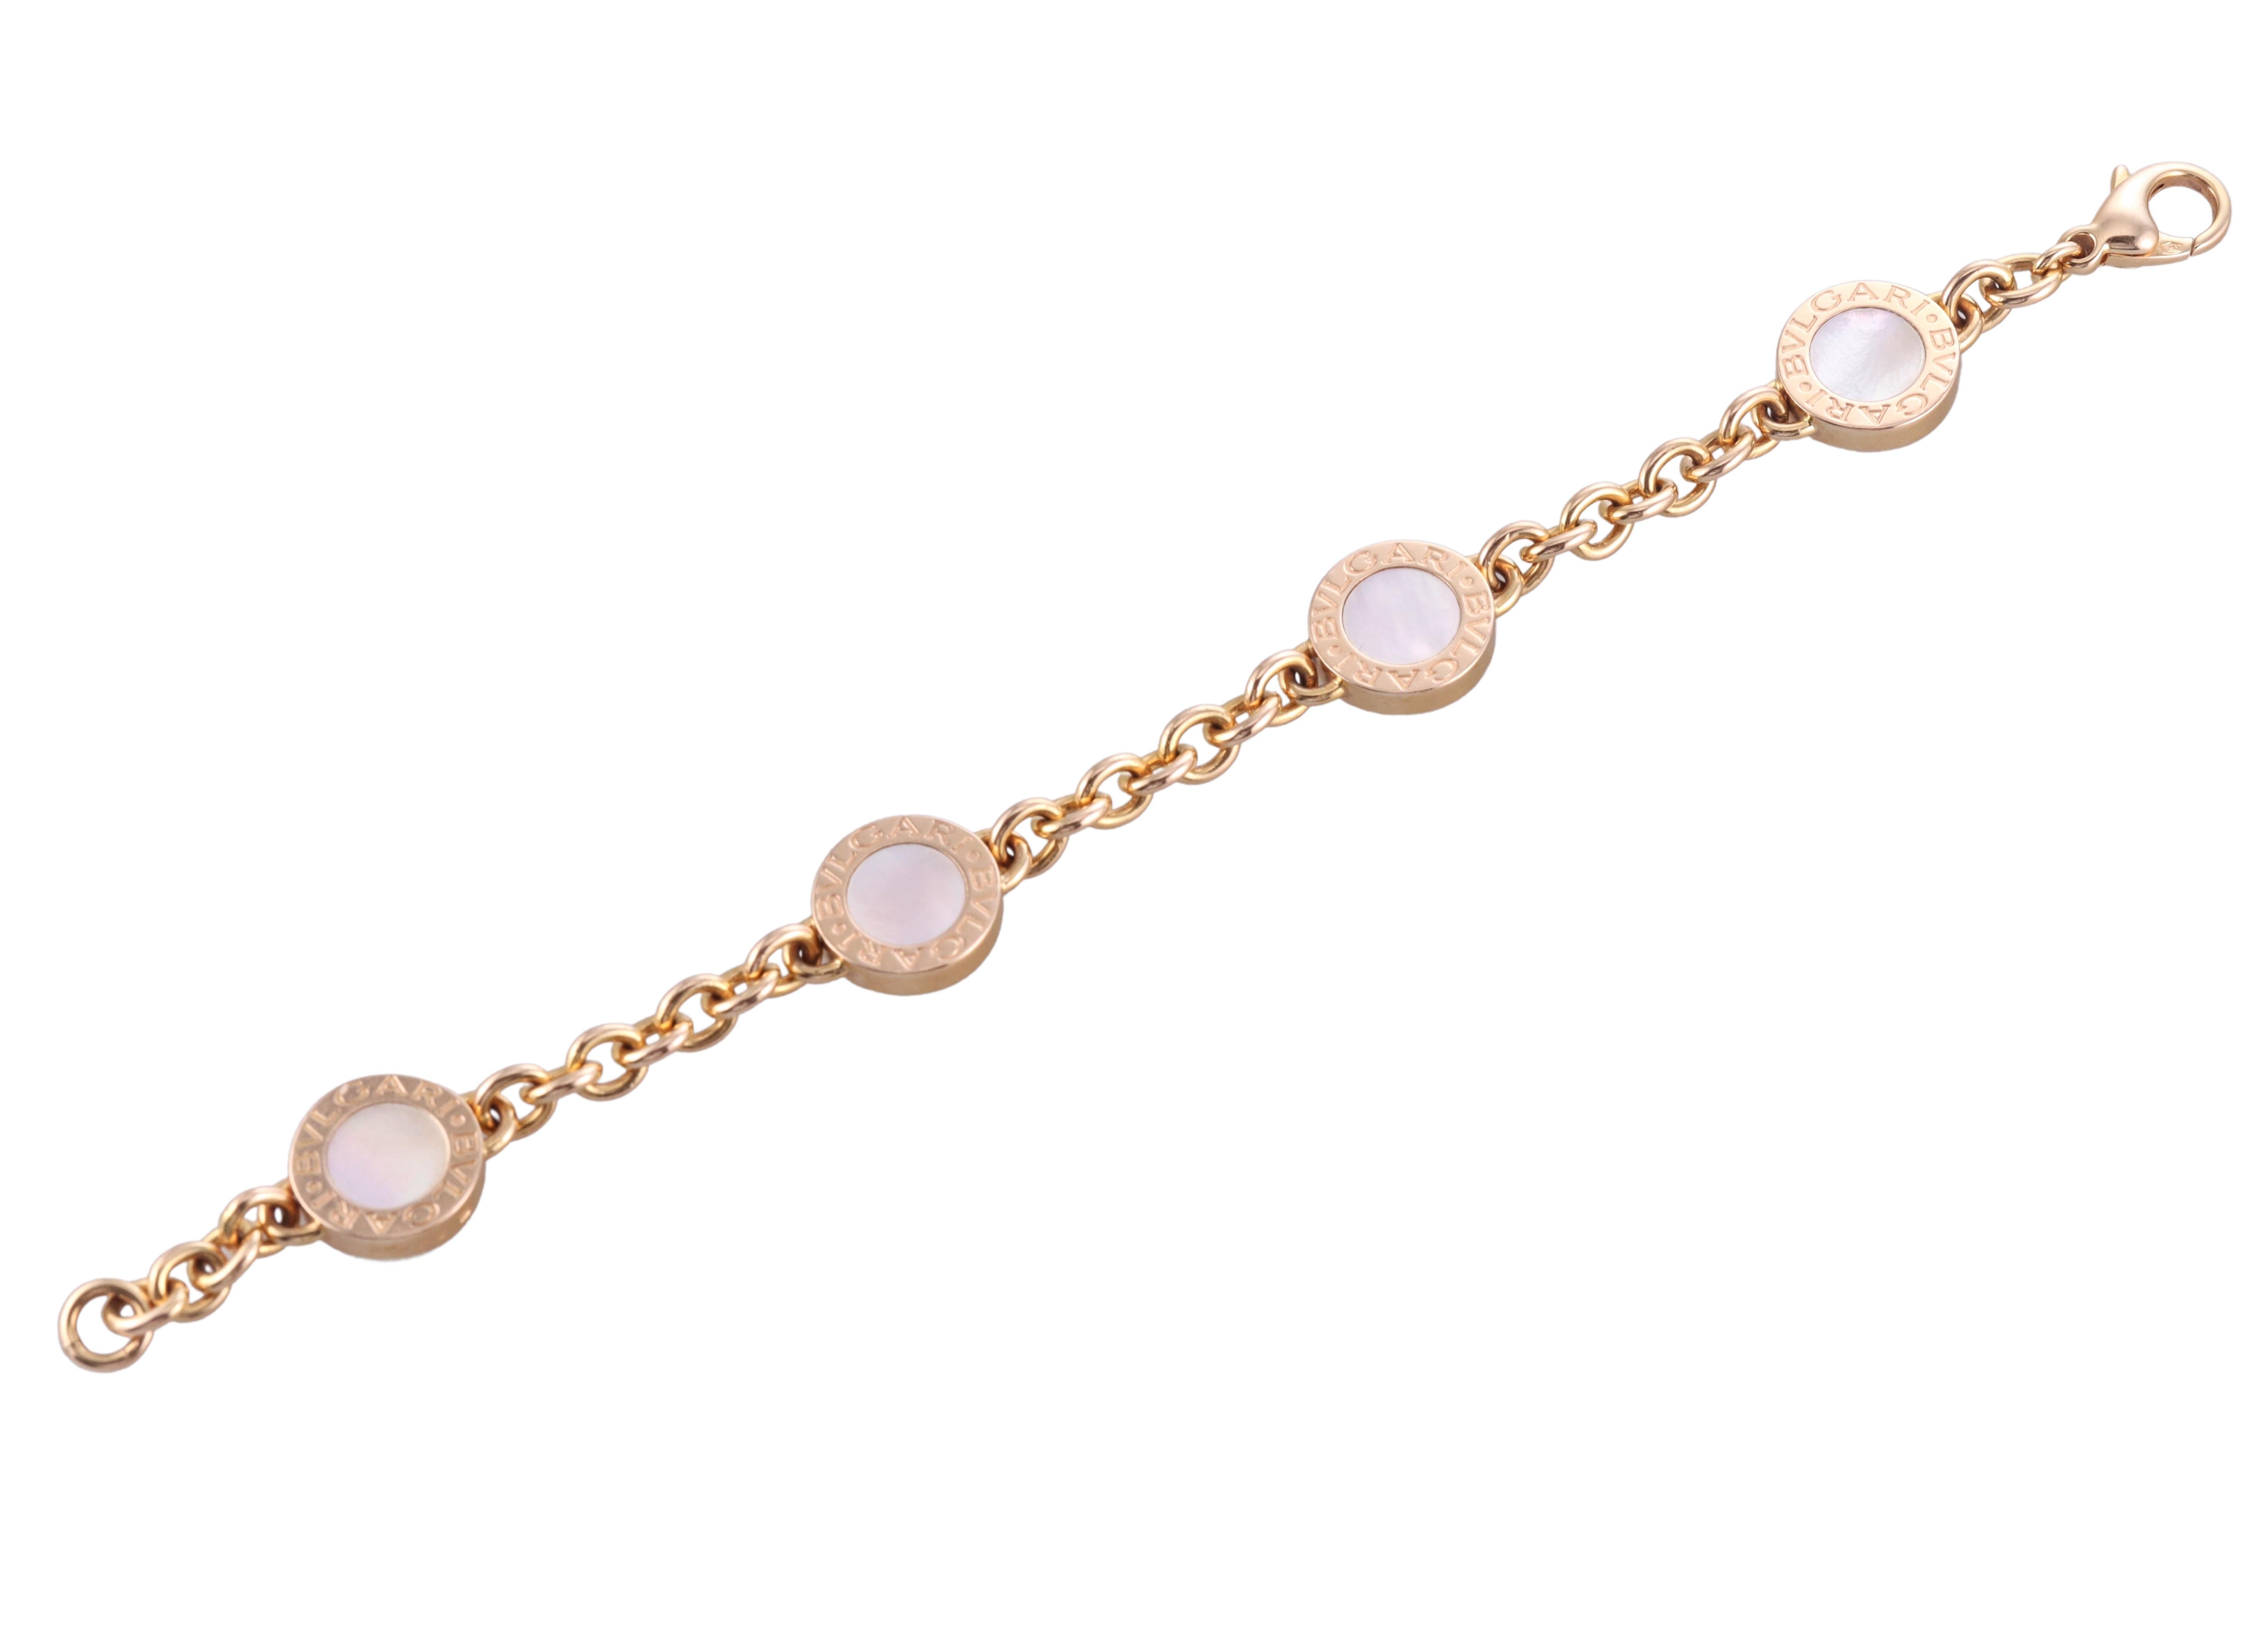 18k rose gold Bvlgari bracelet, featuring four two sided circle links, with mother of pearl and onyx. Bracelet is 6.75